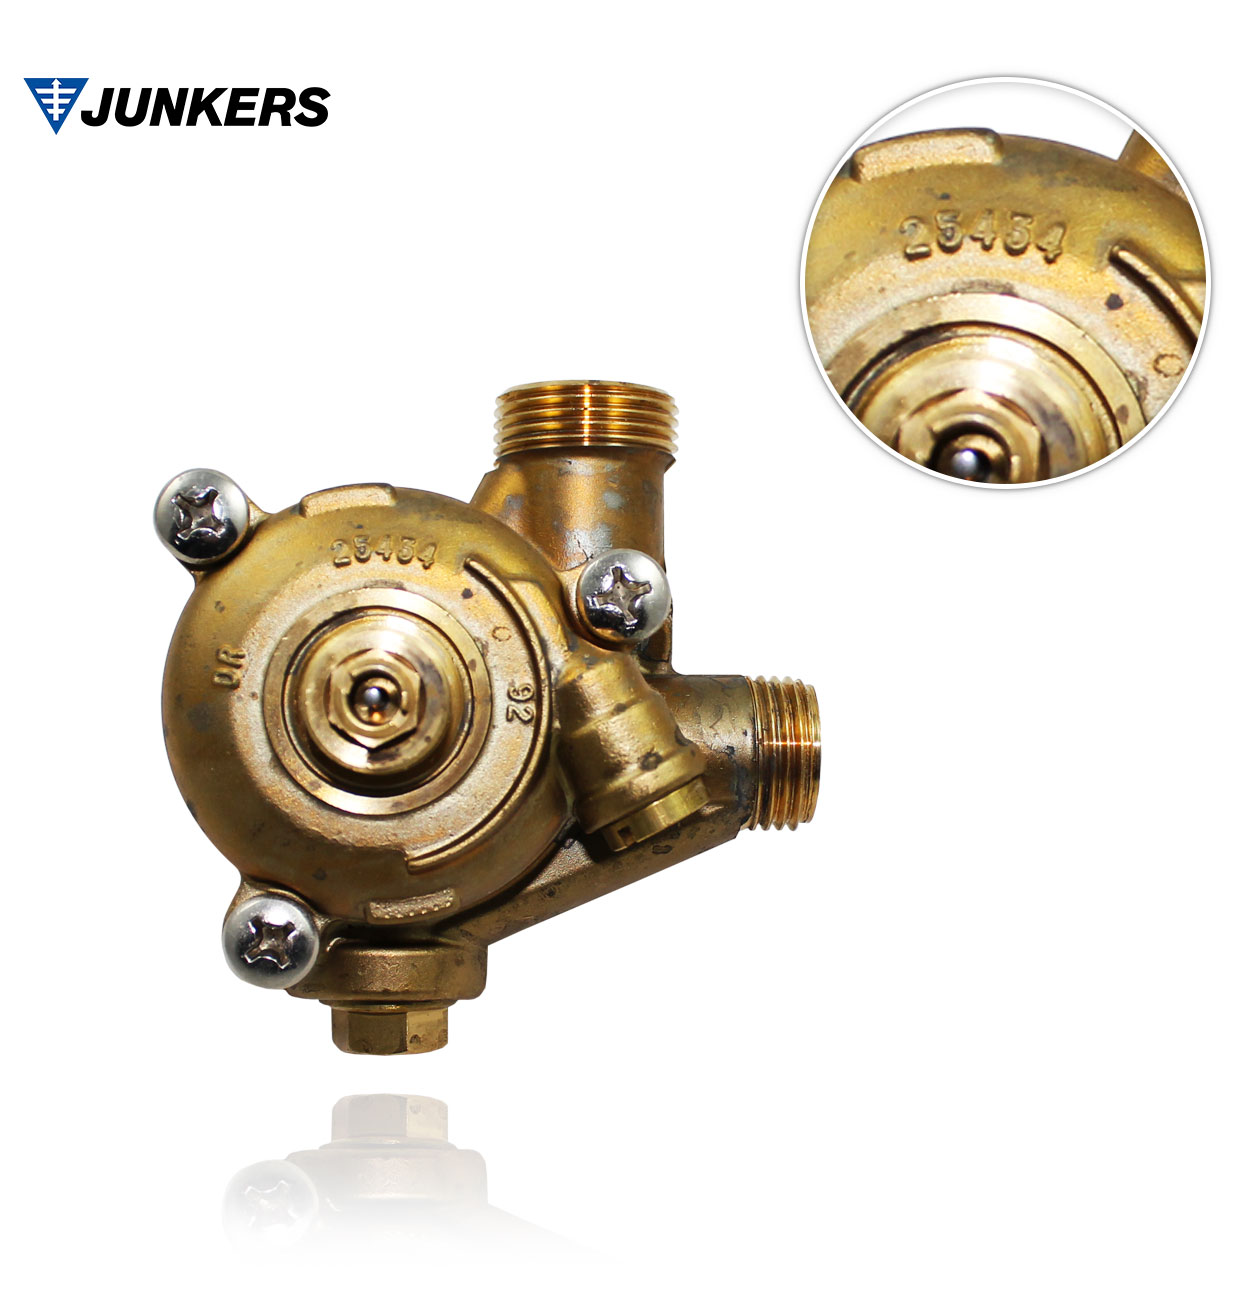 JUNKERS 8717002016 WATER UNIT